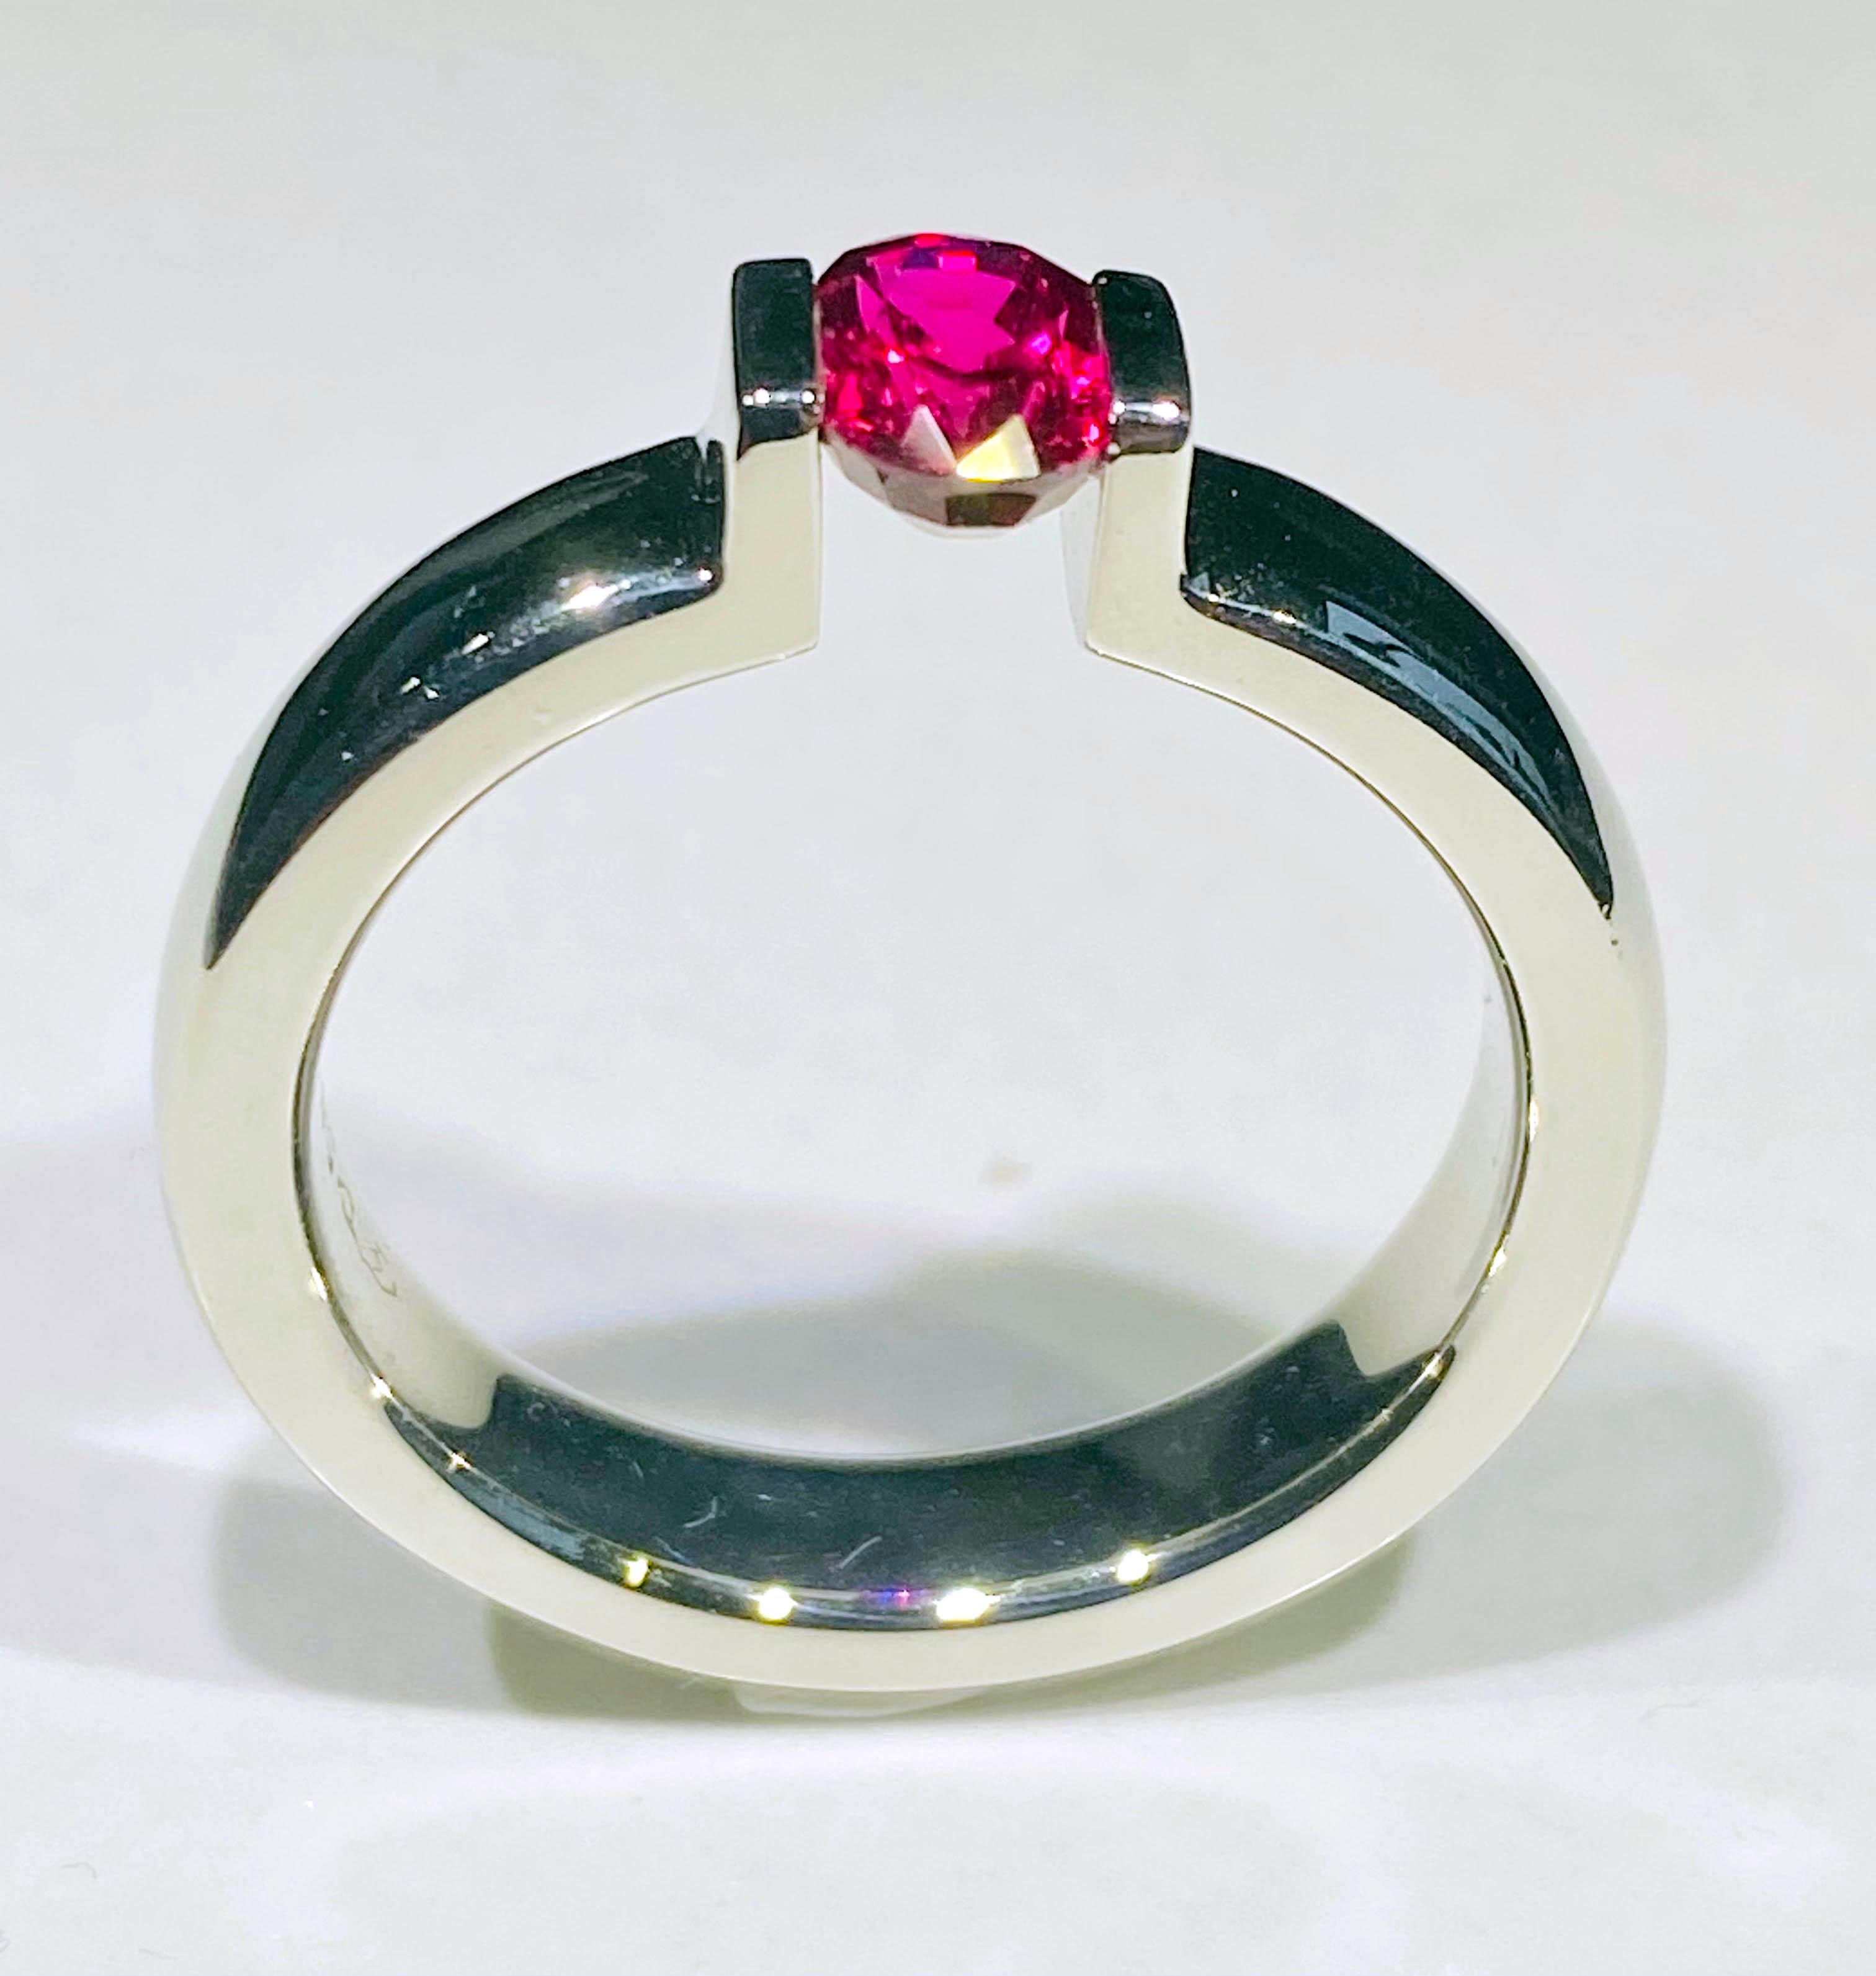 This 1 Carat Ruby is set in a 14kt White Gold tension band. The Ruby is held tightly in place by tension from the White Gold band. The Girdle of the Ruby is nestled in small grooves on either side of the band. The Ruby is very secure and shows all